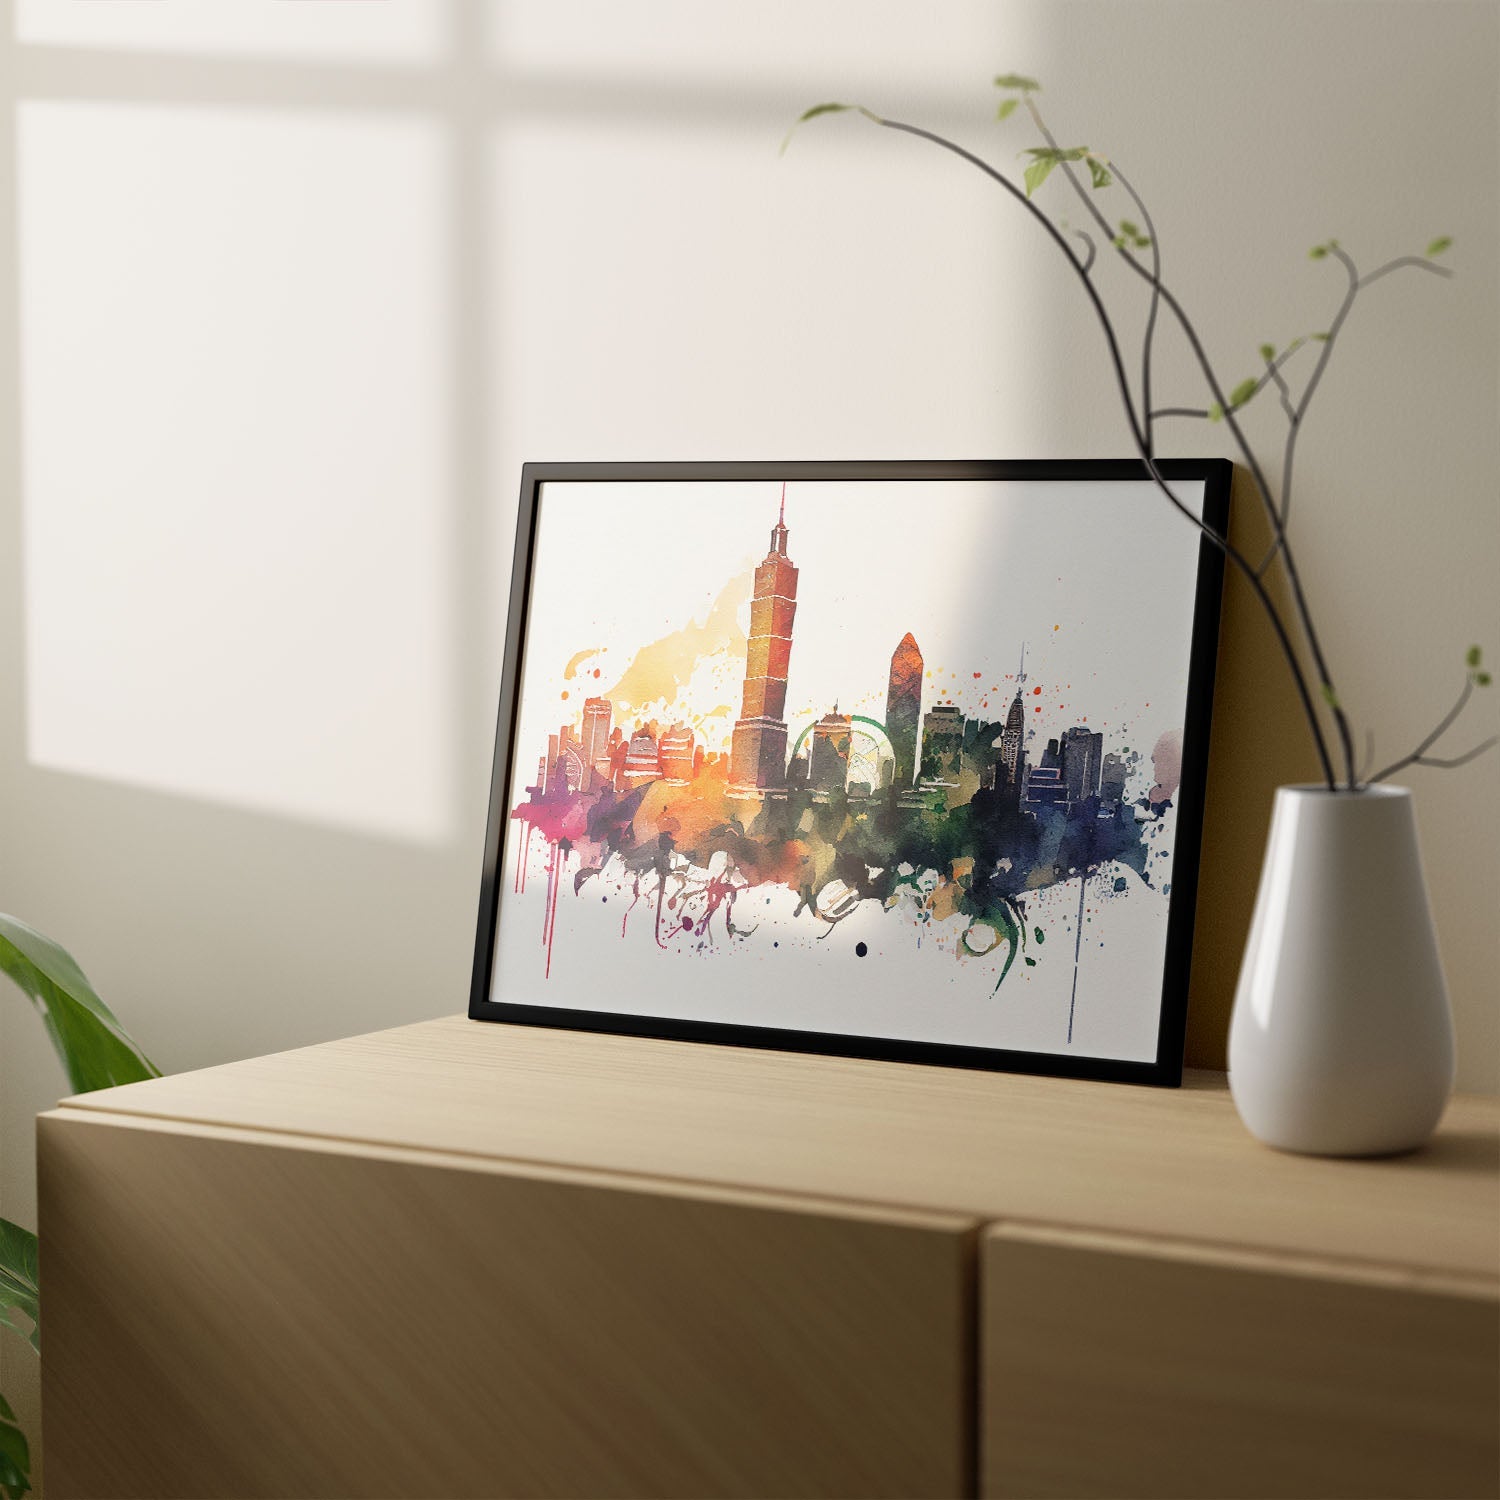 Nacnic watercolor of a skyline of the city of Taipei. Aesthetic Wall Art Prints for Bedroom or Living Room Design.-Artwork-Nacnic-A4-Sin Marco-Nacnic Estudio SL